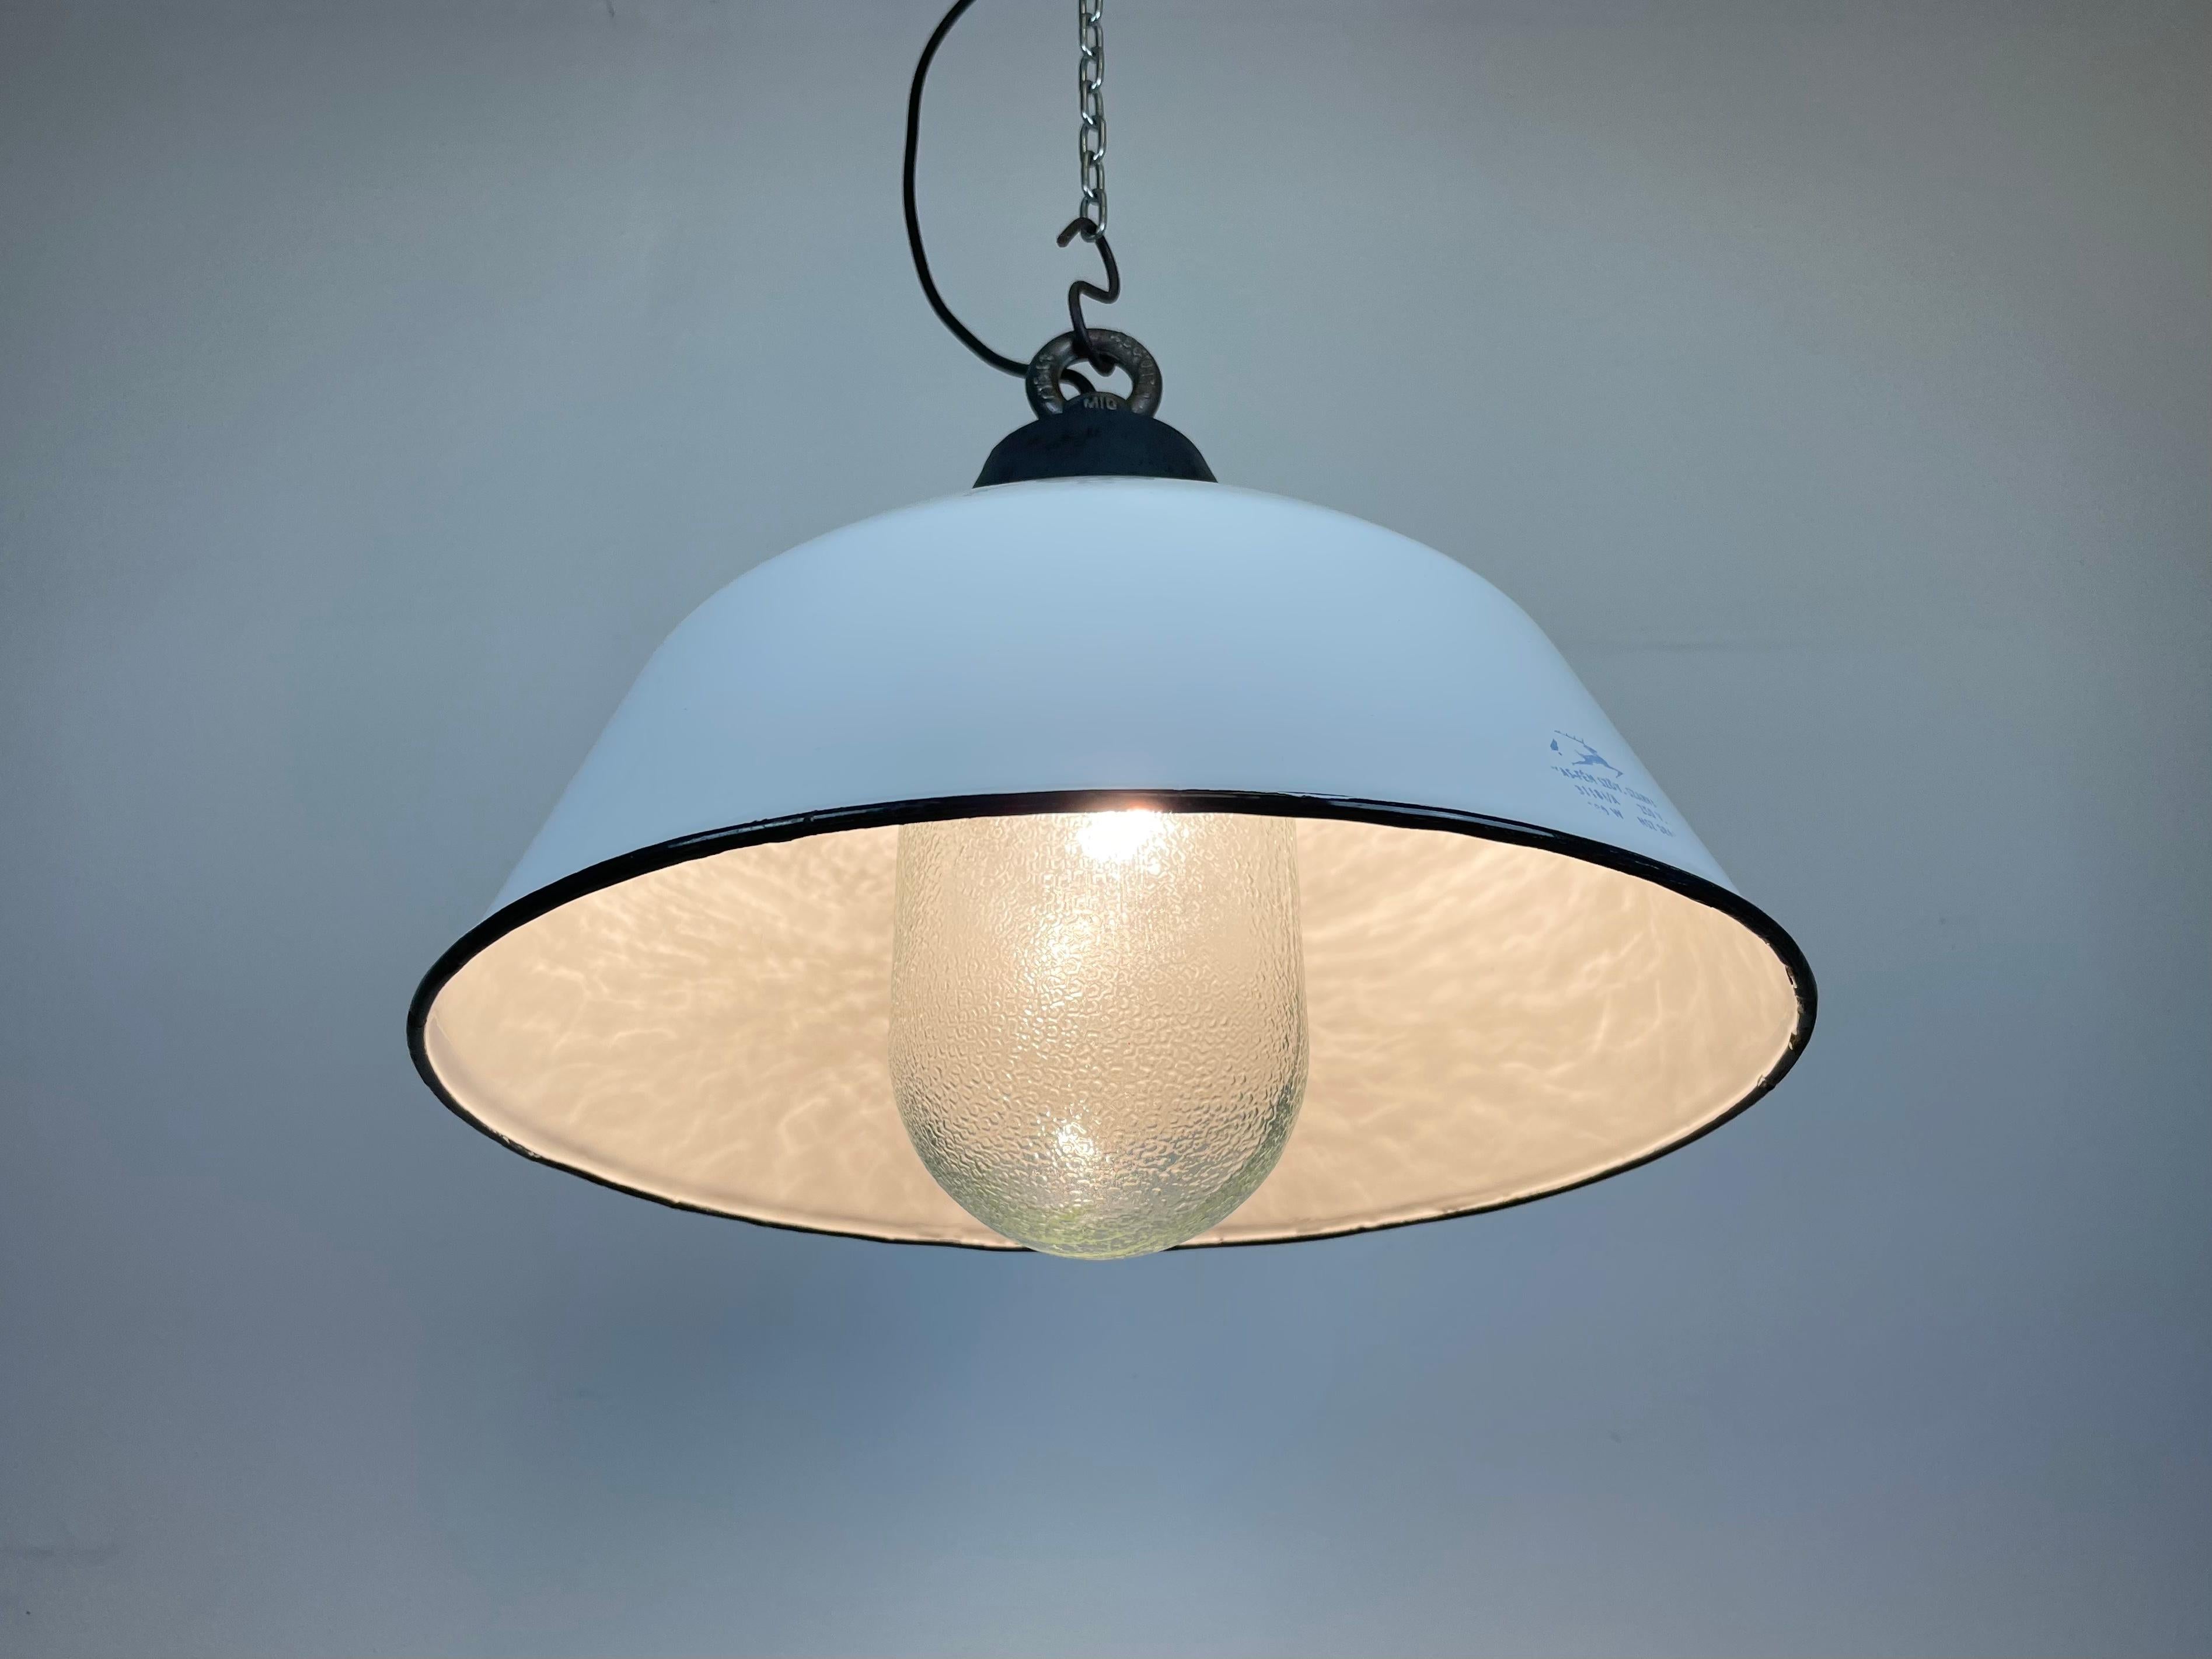 White Enamel and Cast Iron Industrial Pendant Light with Glass Cover, 1960s For Sale 5